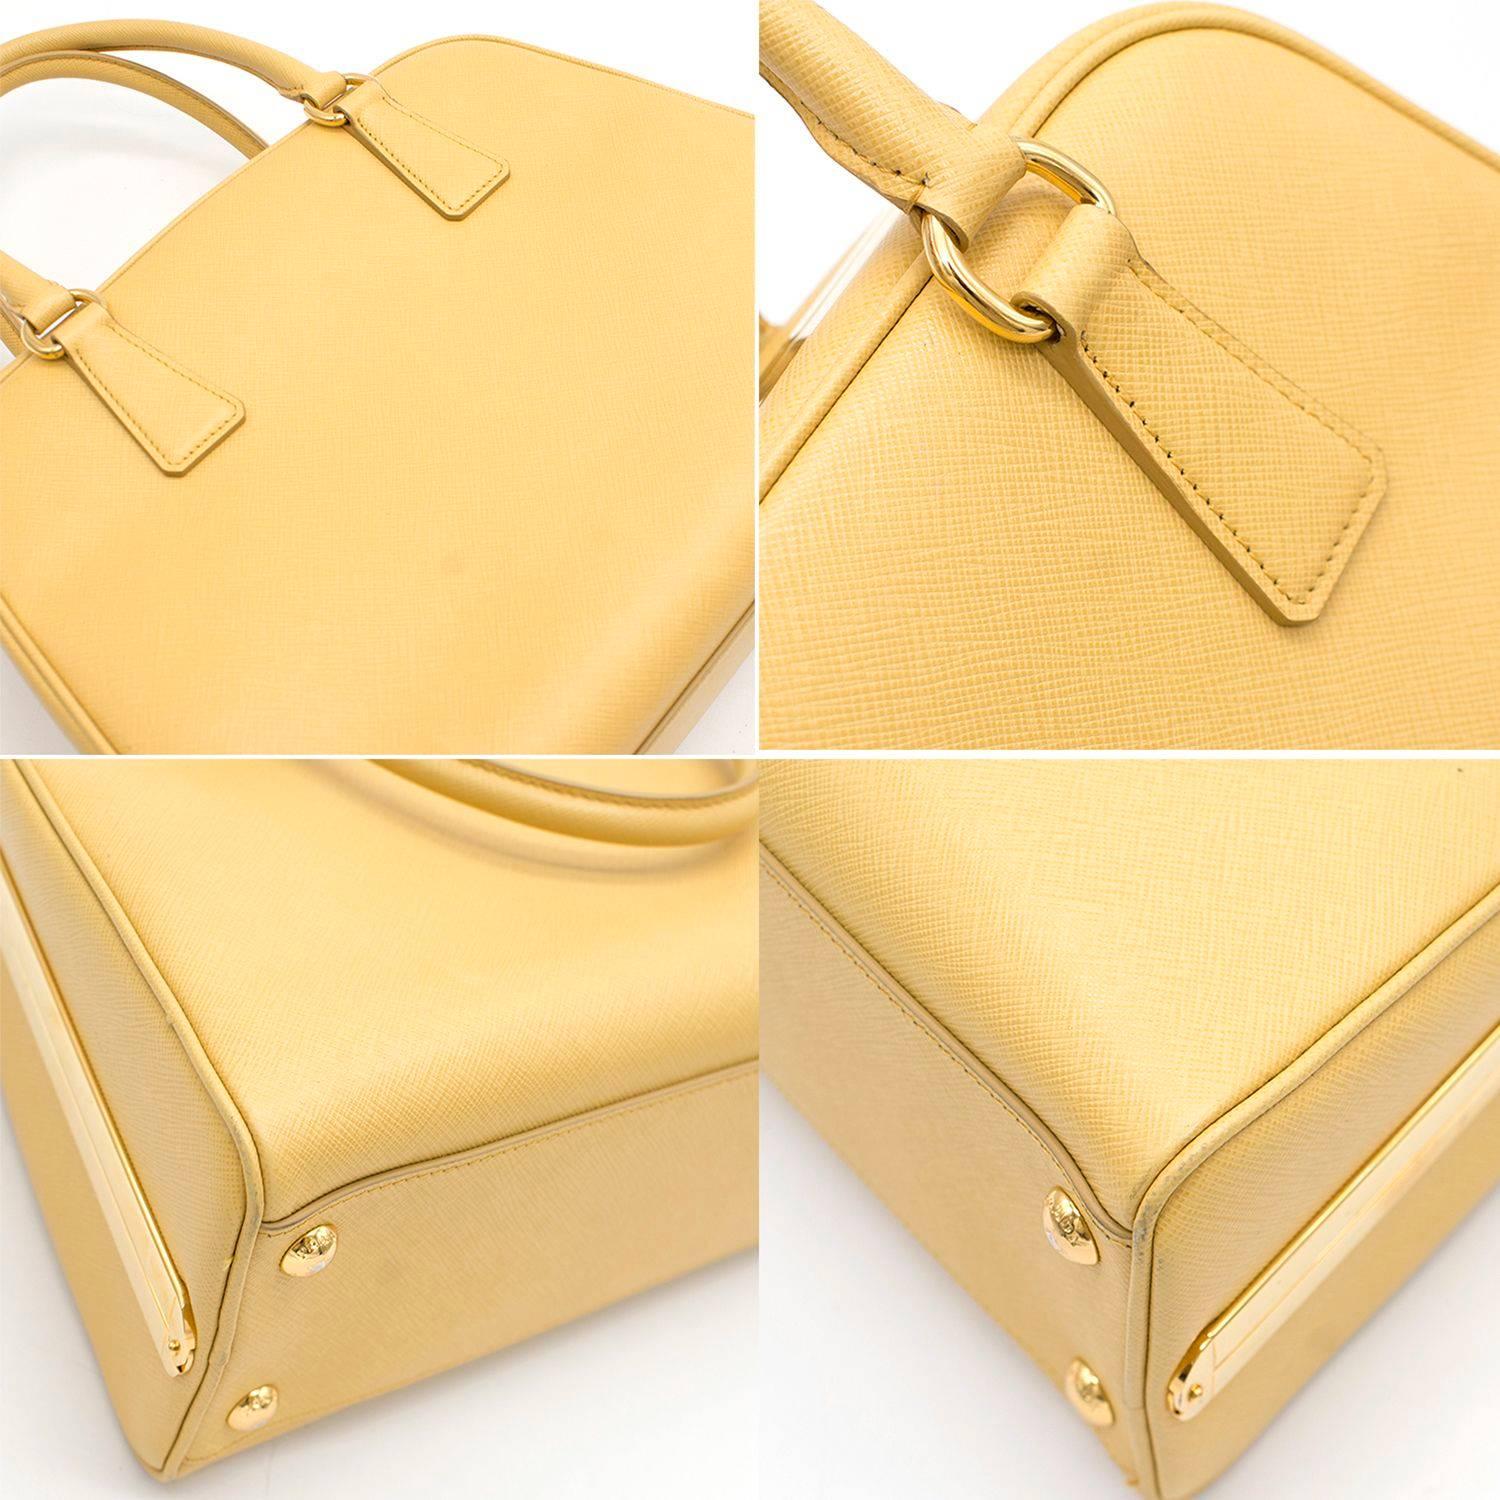 Prada Pyramid Canary Yellow Top Handle Bag In Excellent Condition For Sale In London, GB